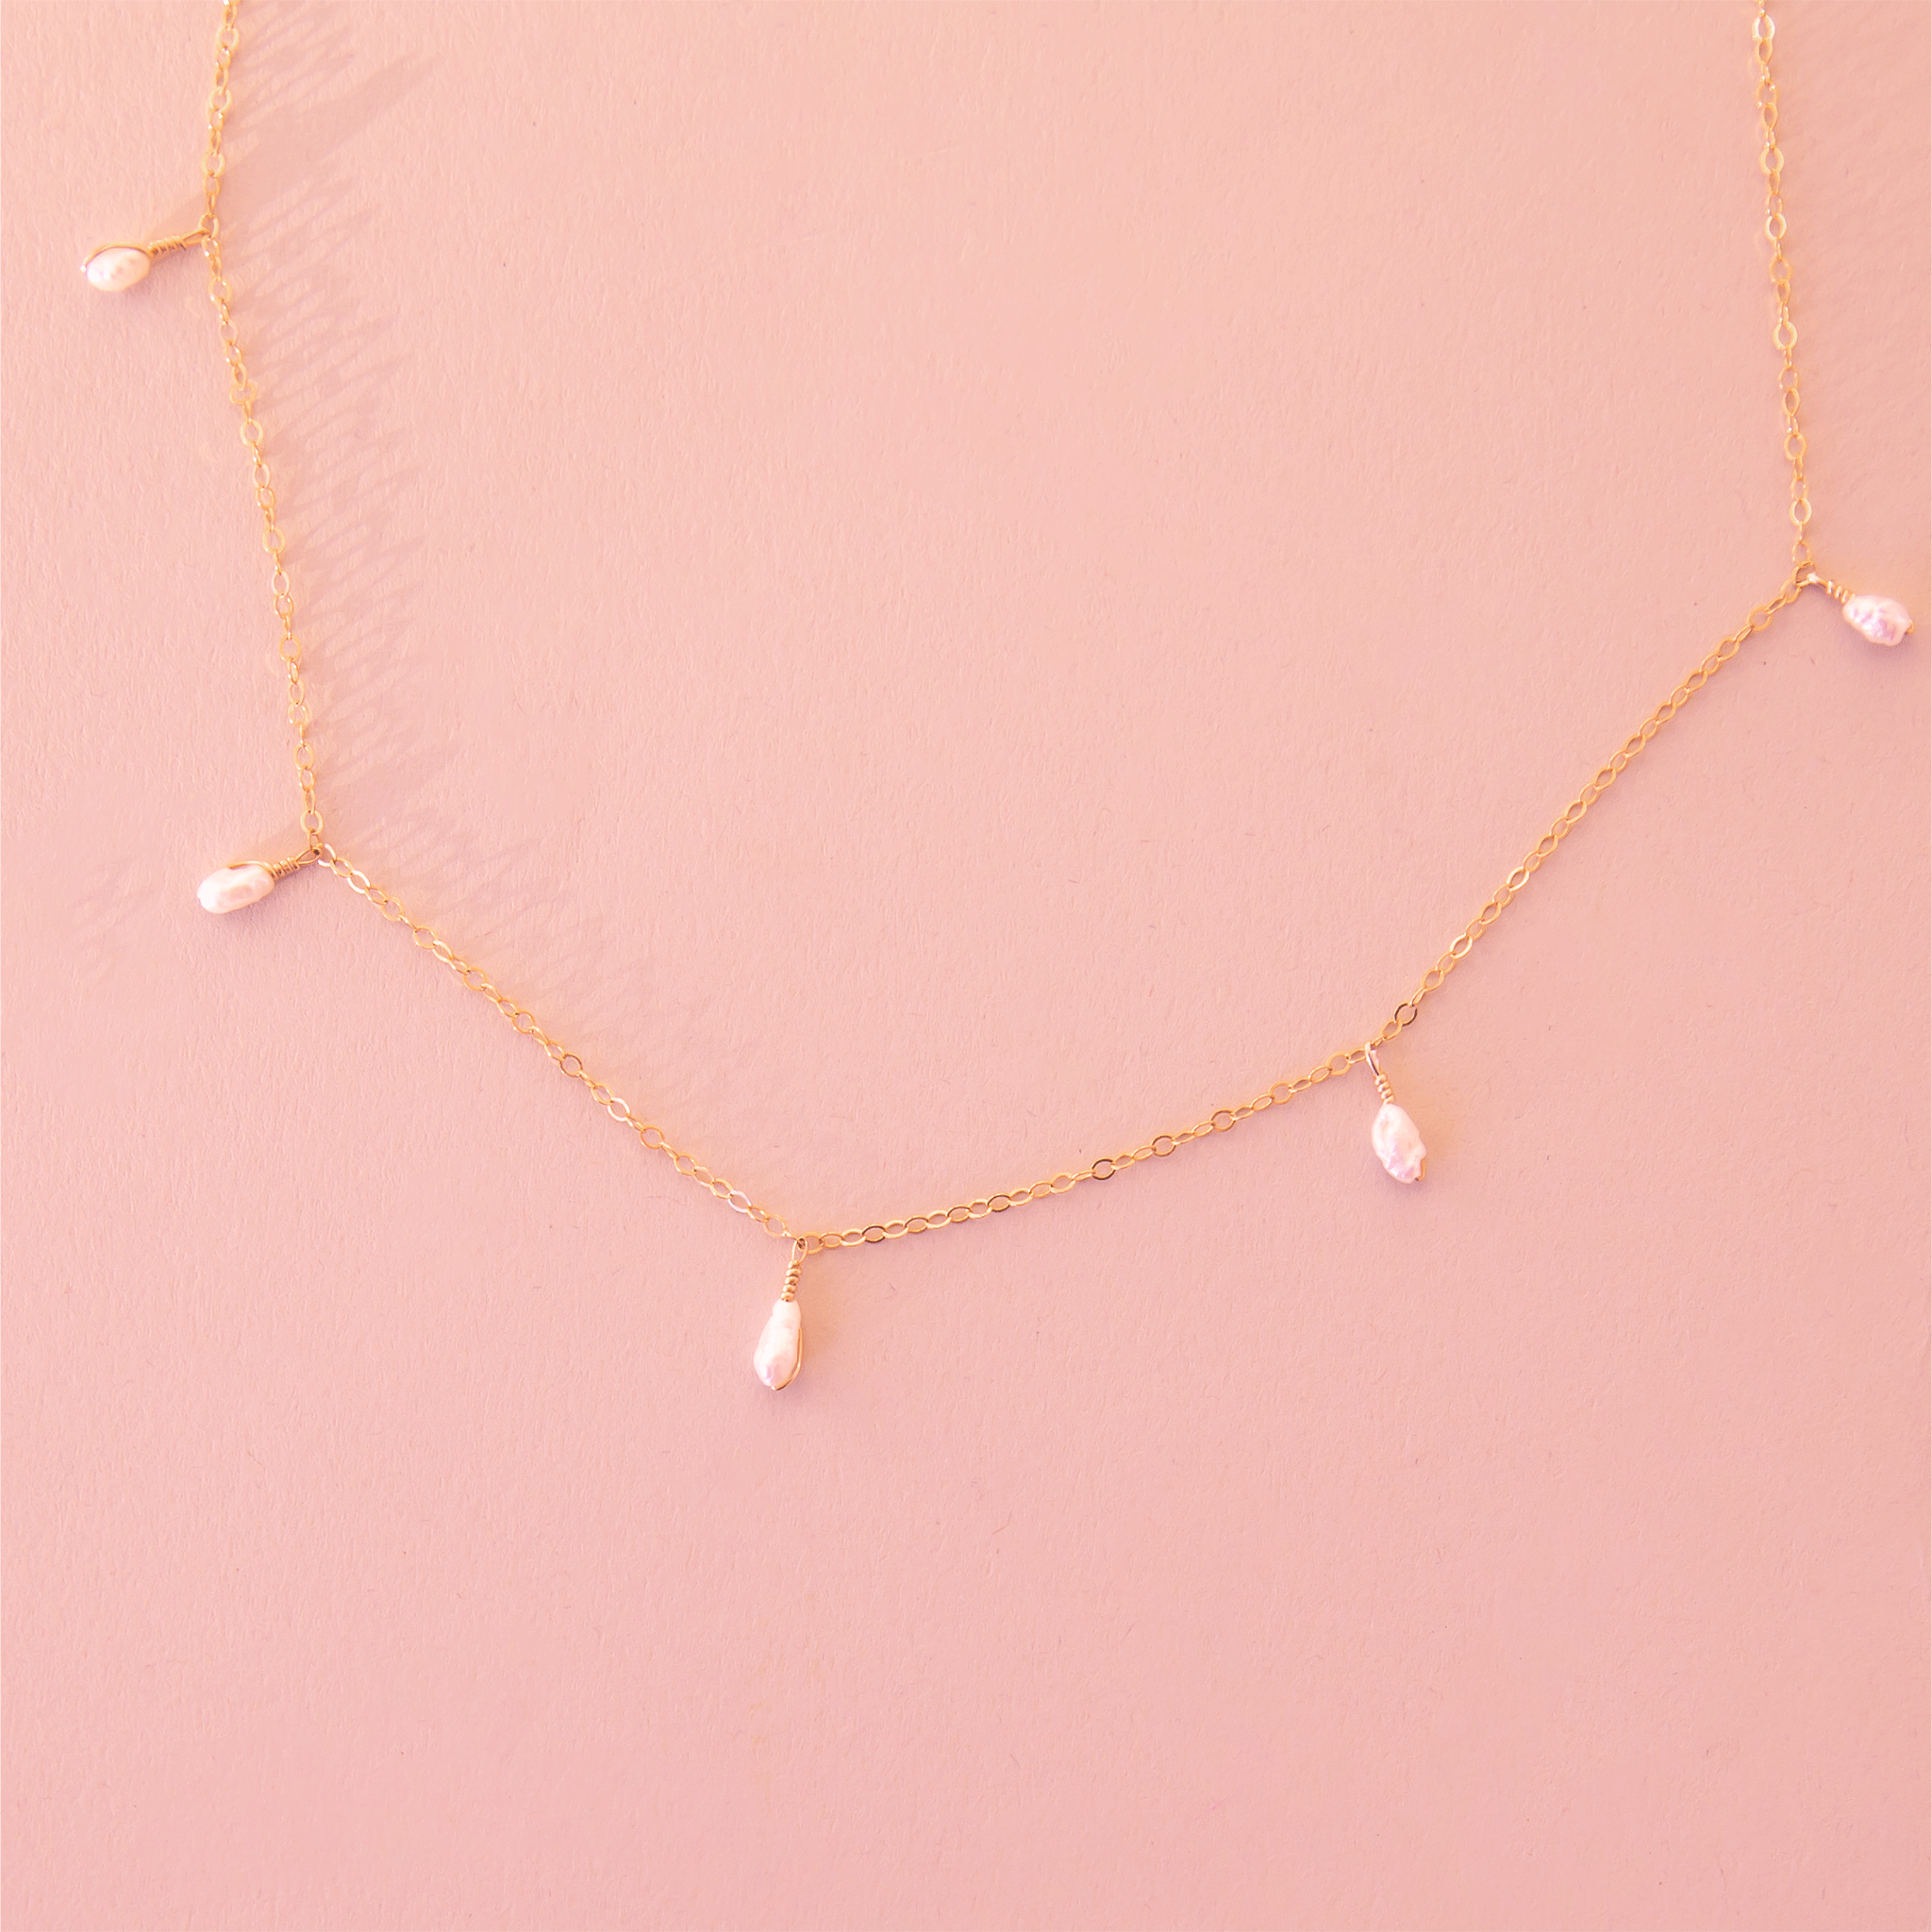 A dainty gold chain necklace with five freshwater pearls hanging spaced out on the chain.